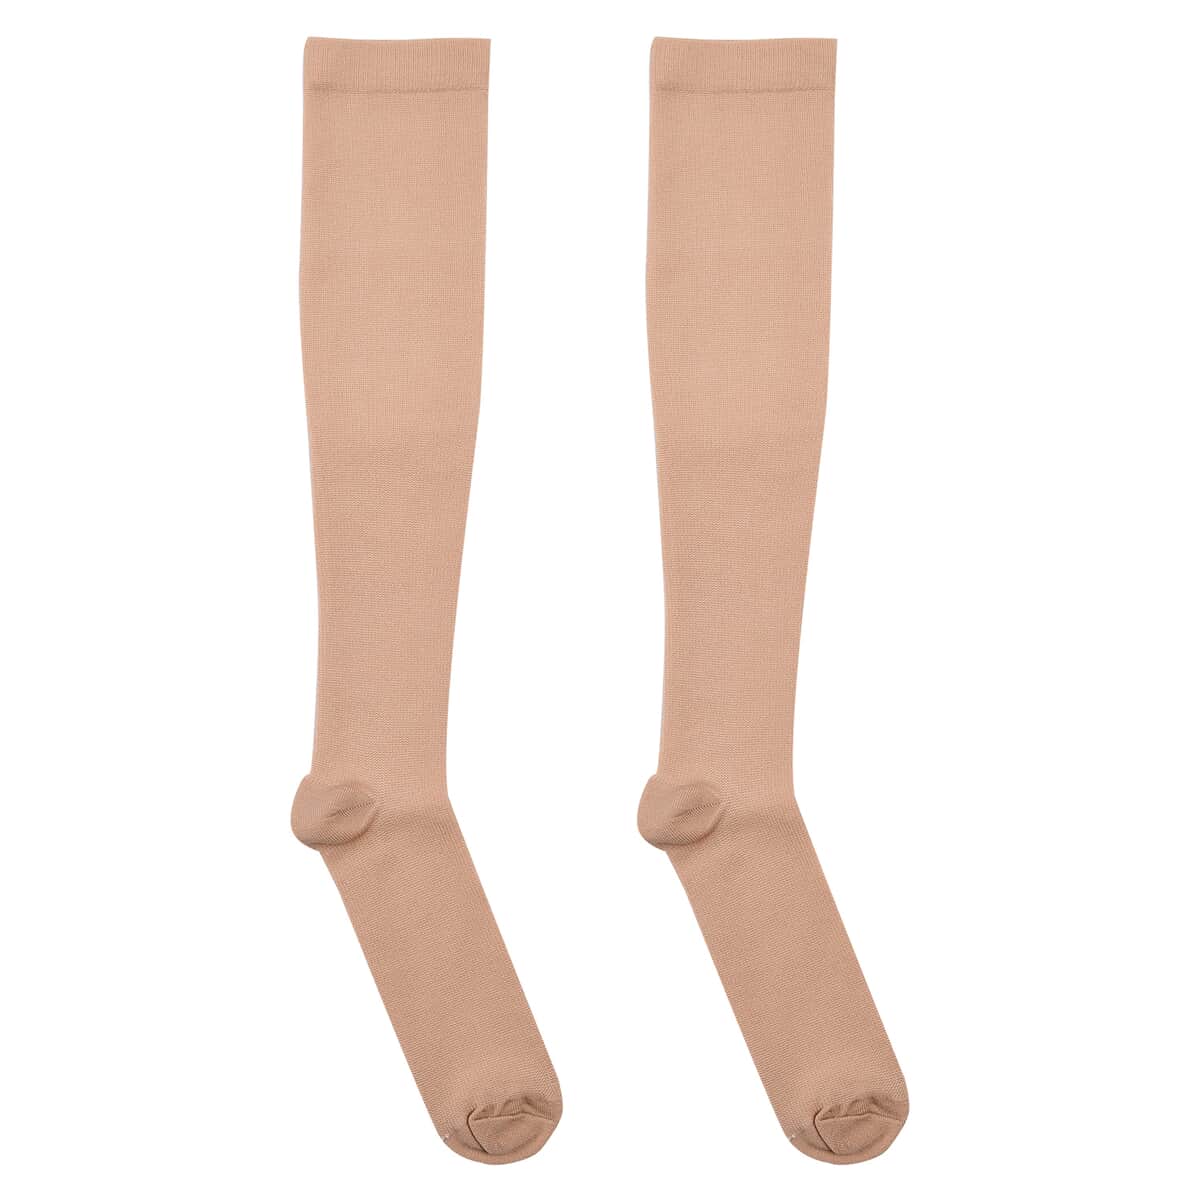 Set of 4 Pairs Knee Length Copper Infused Compression Socks - Classic Multi Color (S/M) image number 4